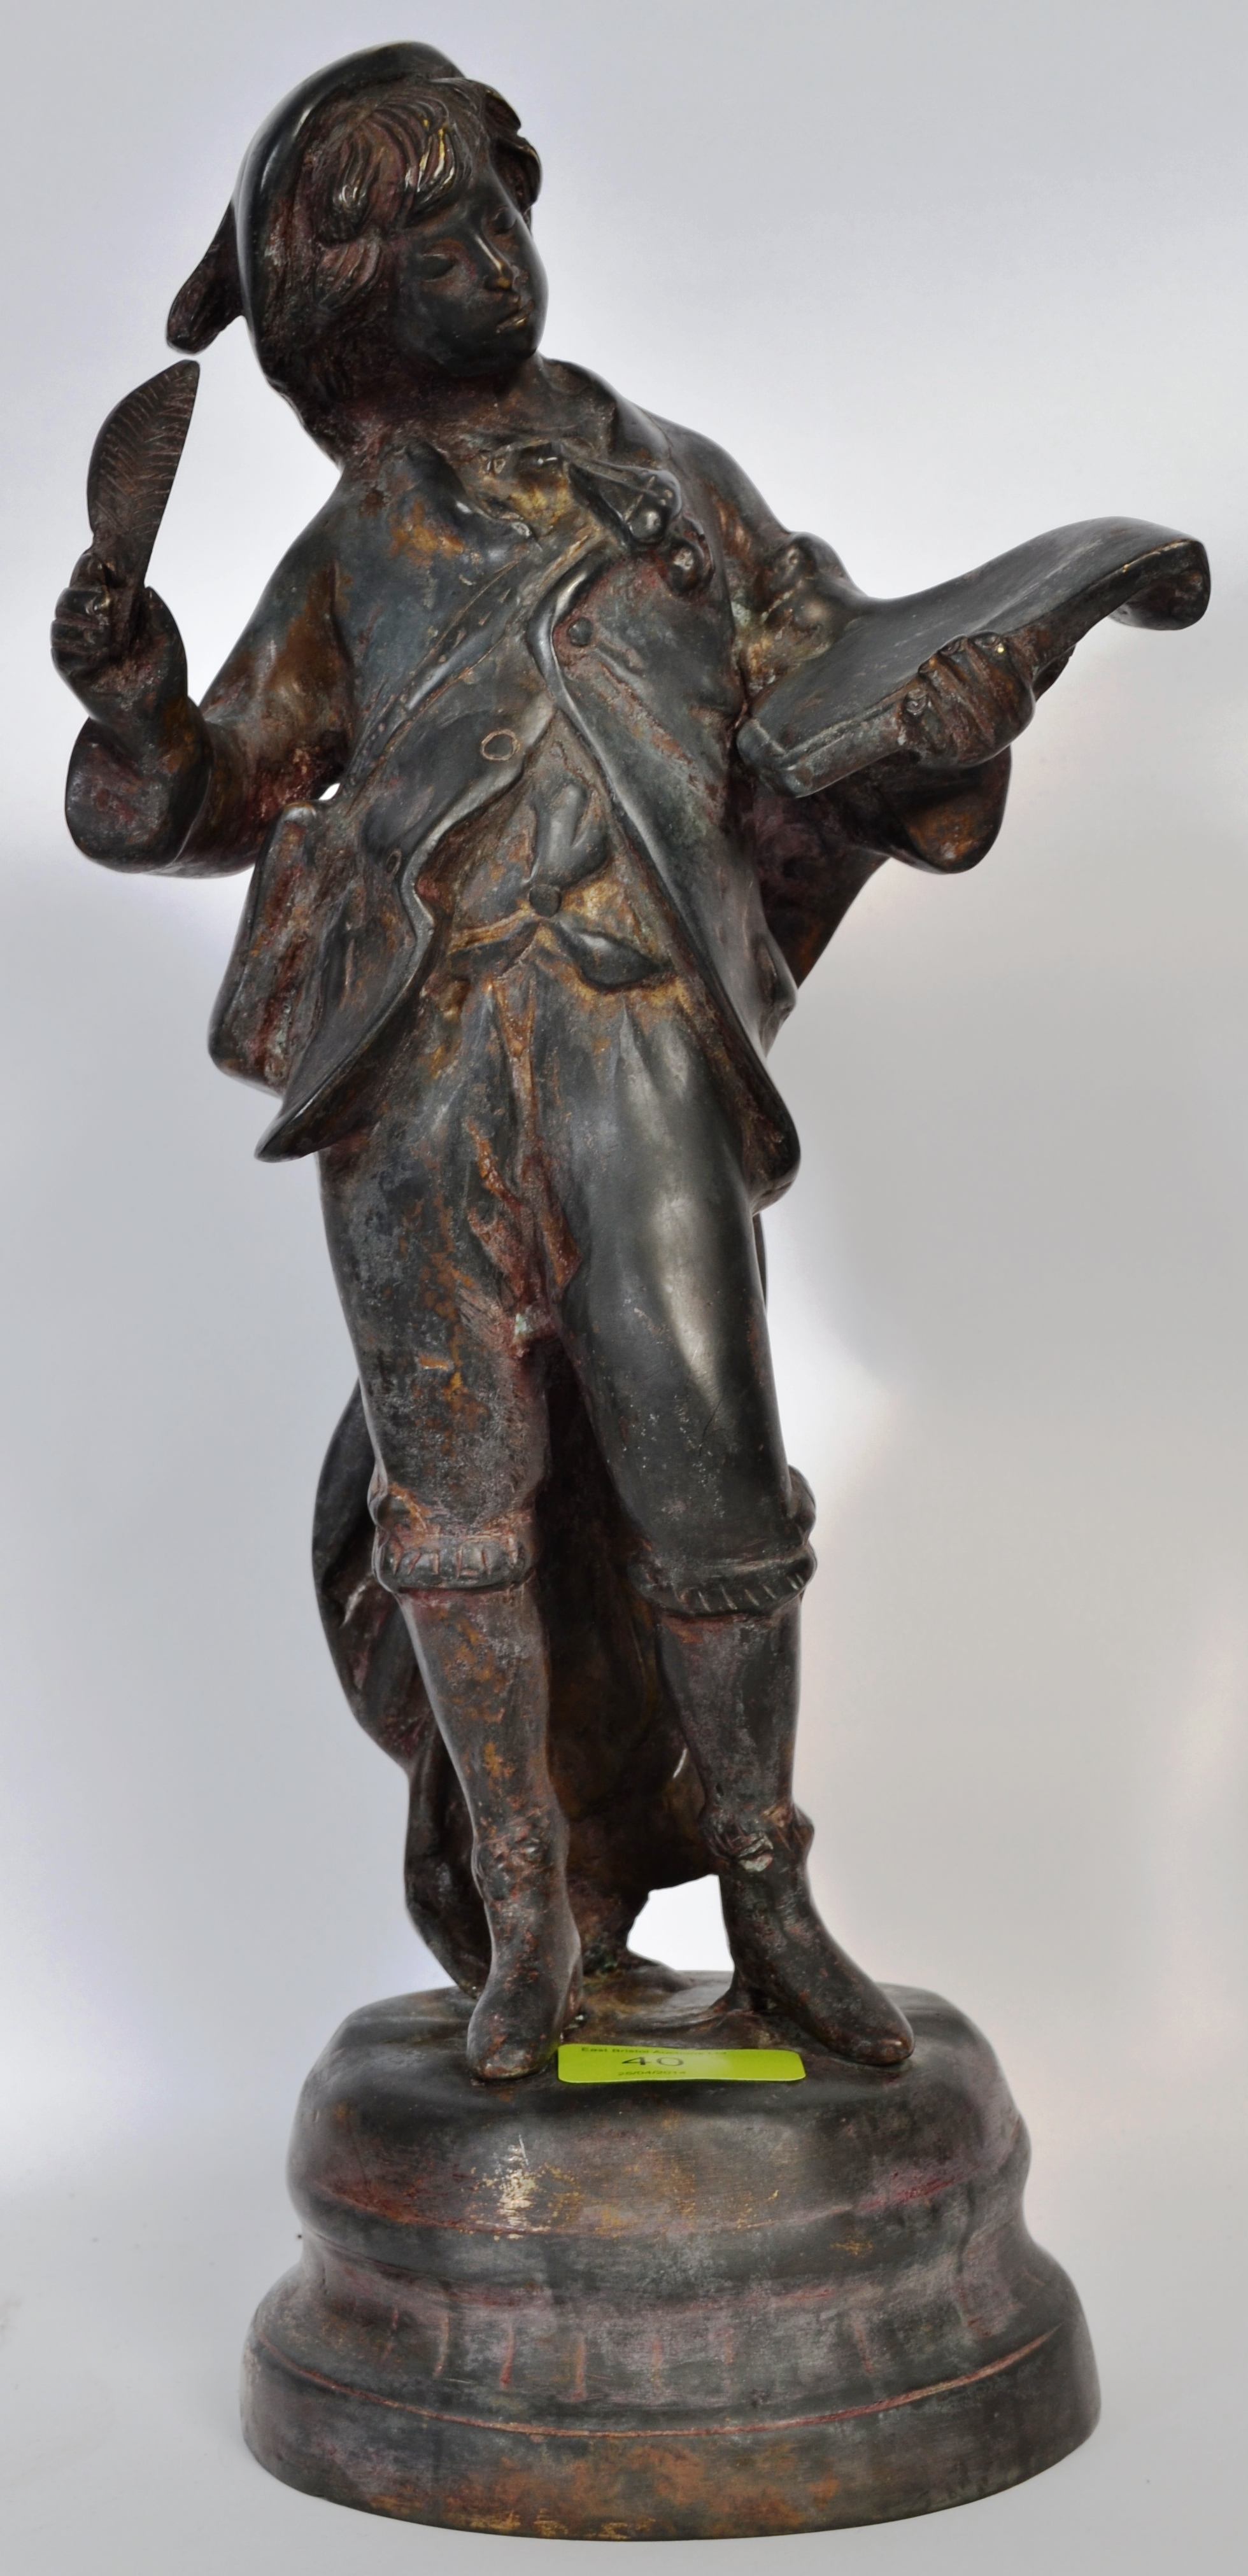 A bronze figure of a boy scholer, with quill and ledger.